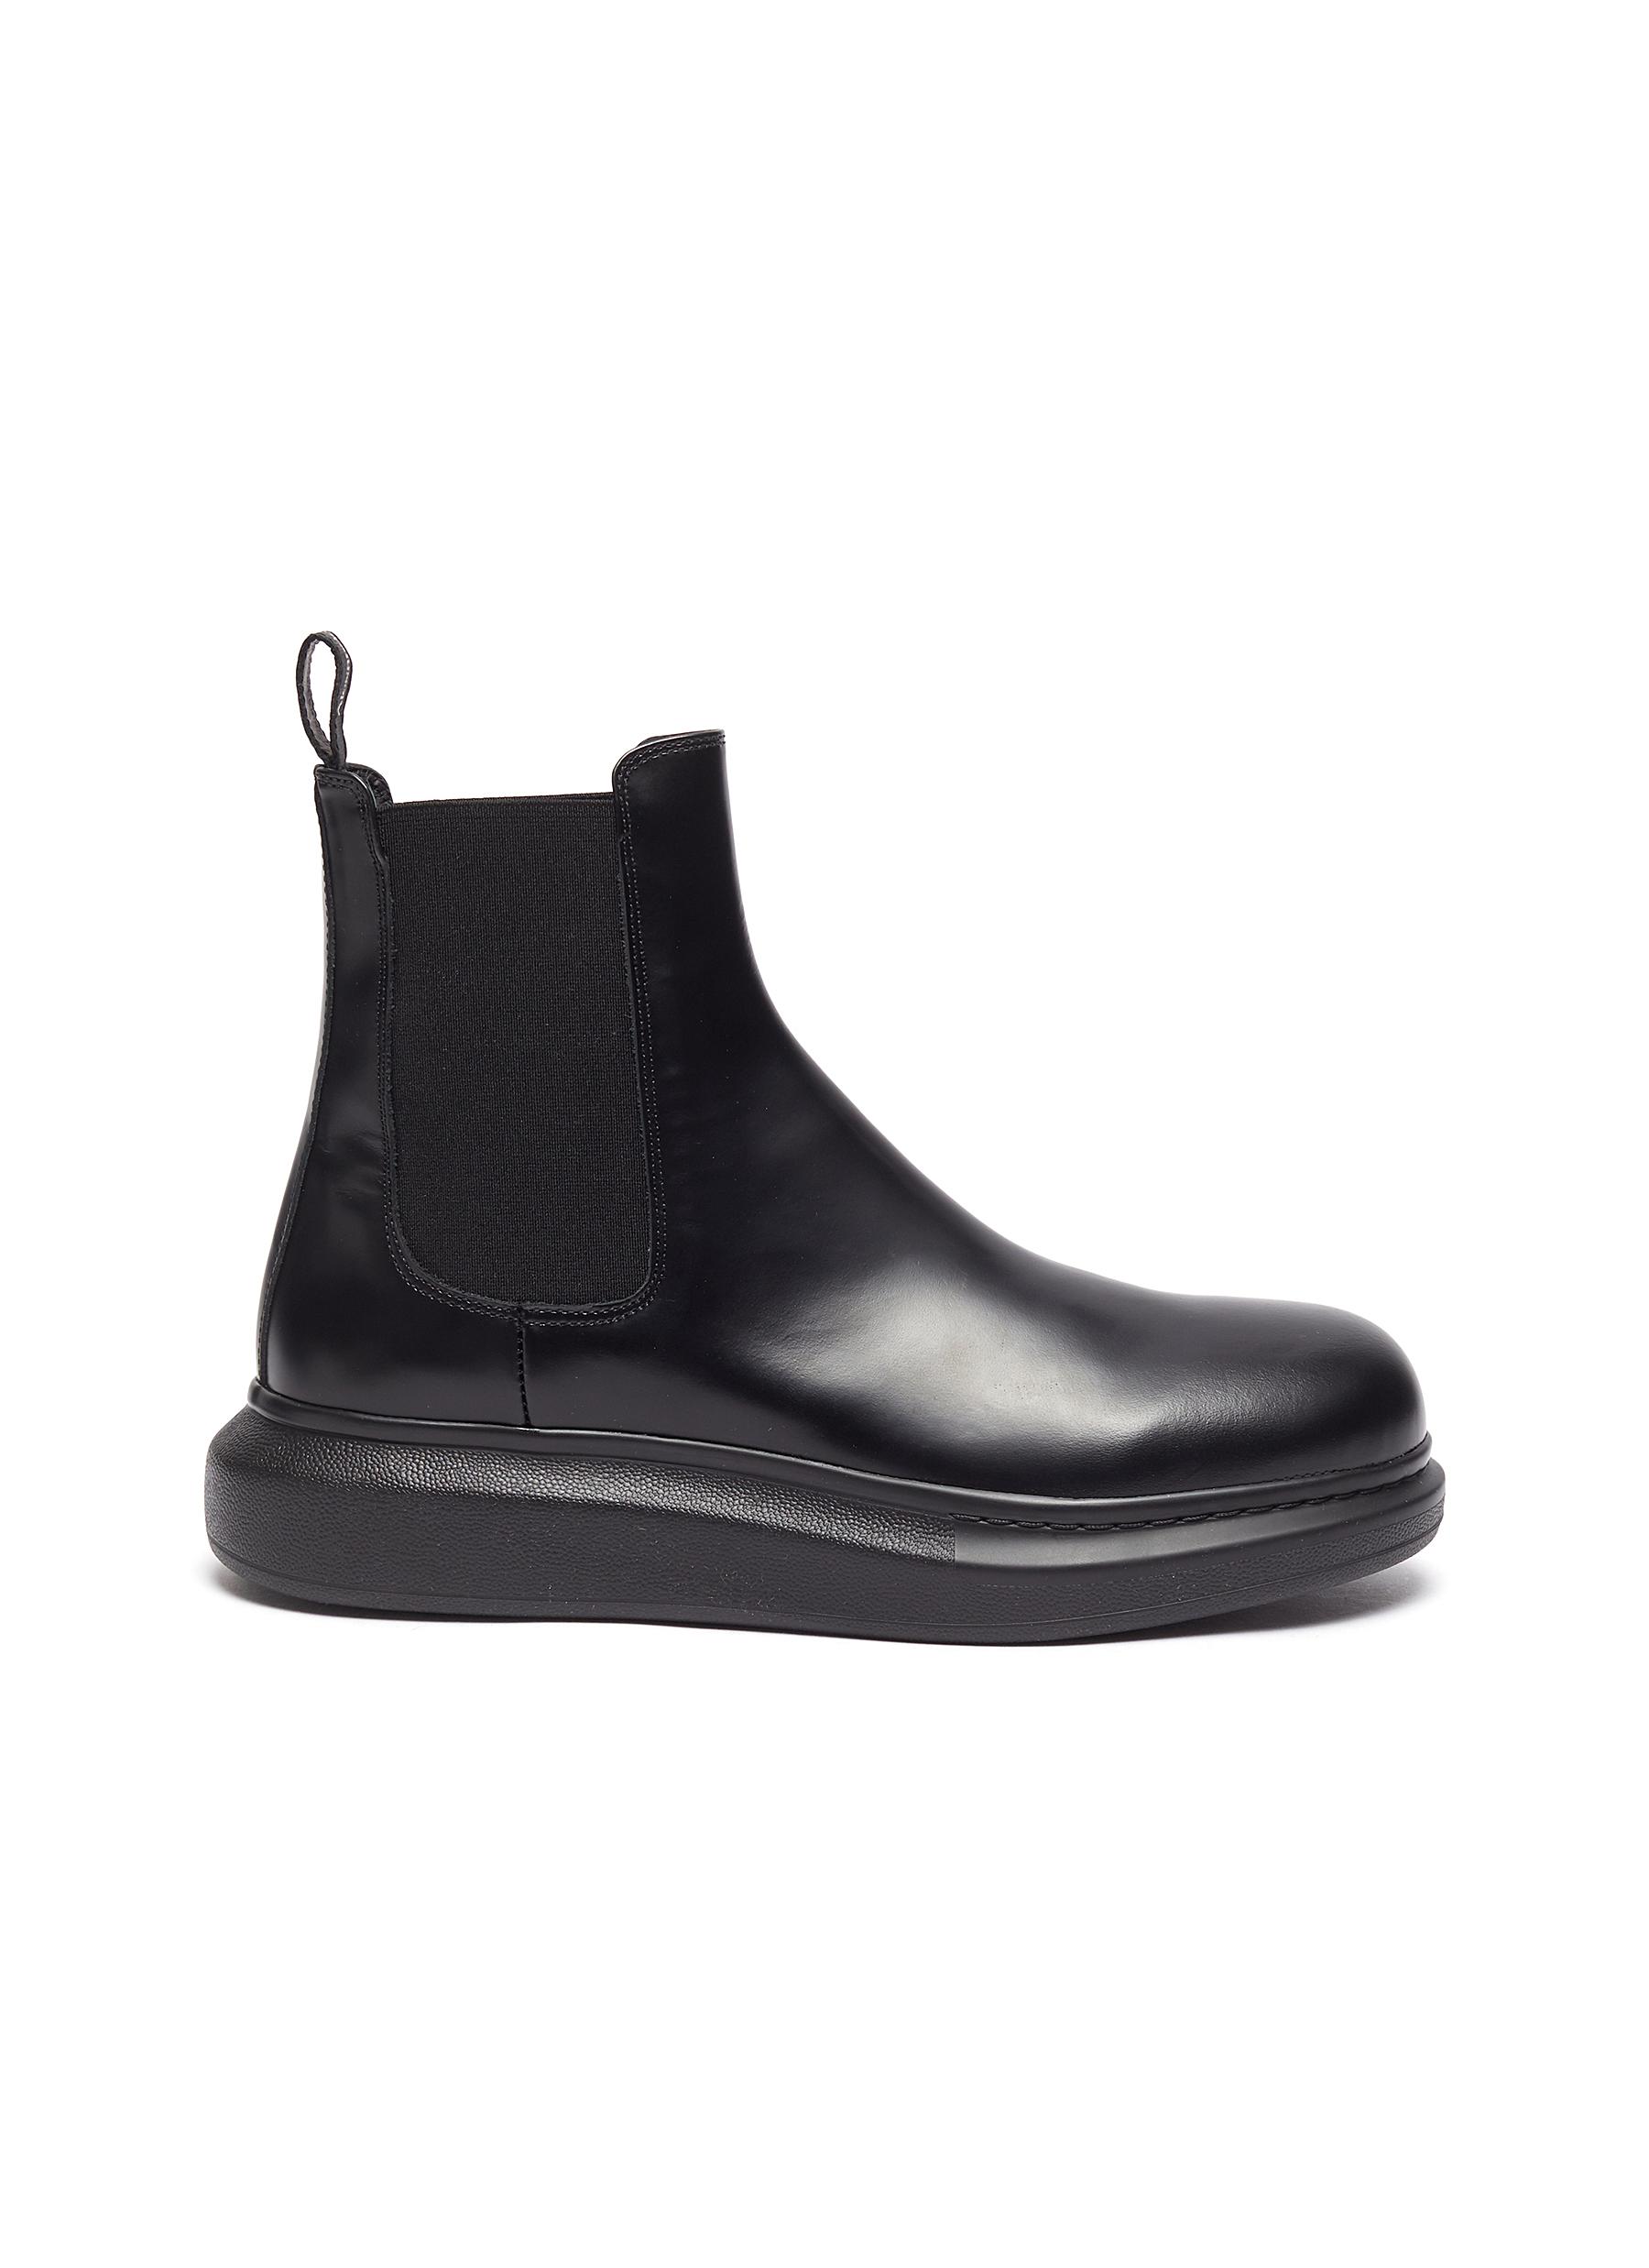 Hybrid wedge leather Chelsea boots